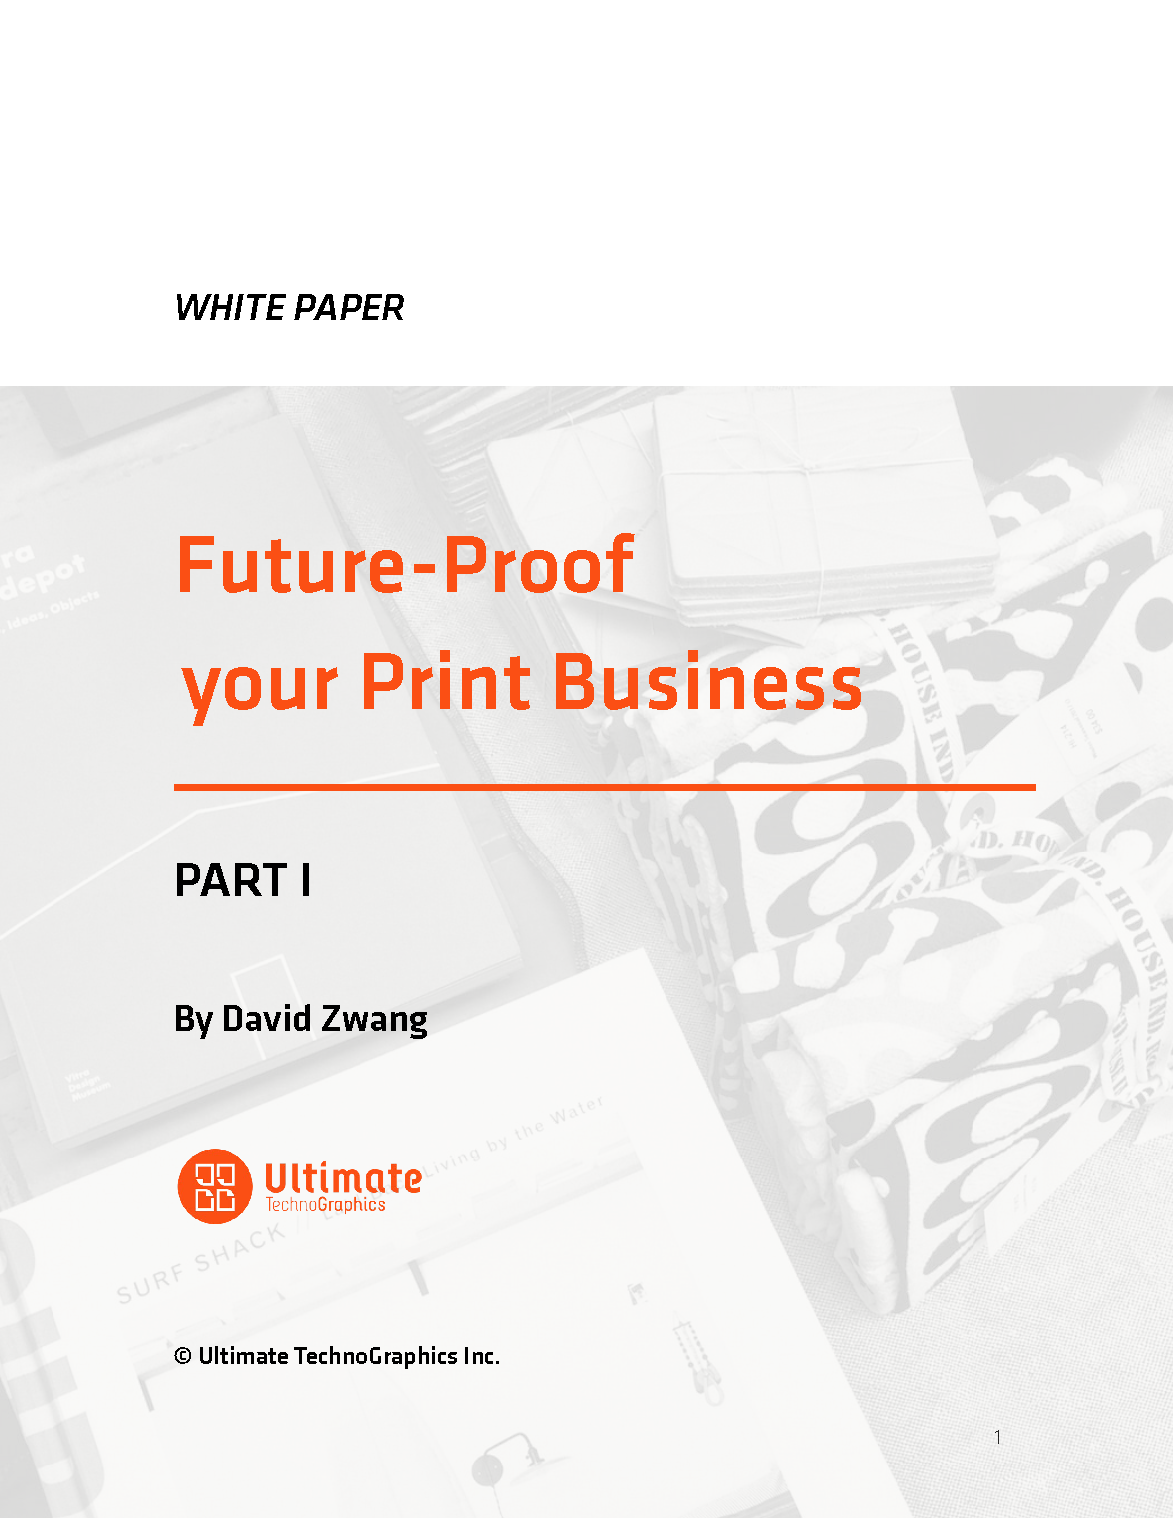 Ultimate TechnoGraphics White Paper Future-Proof your Print Business - Part 1